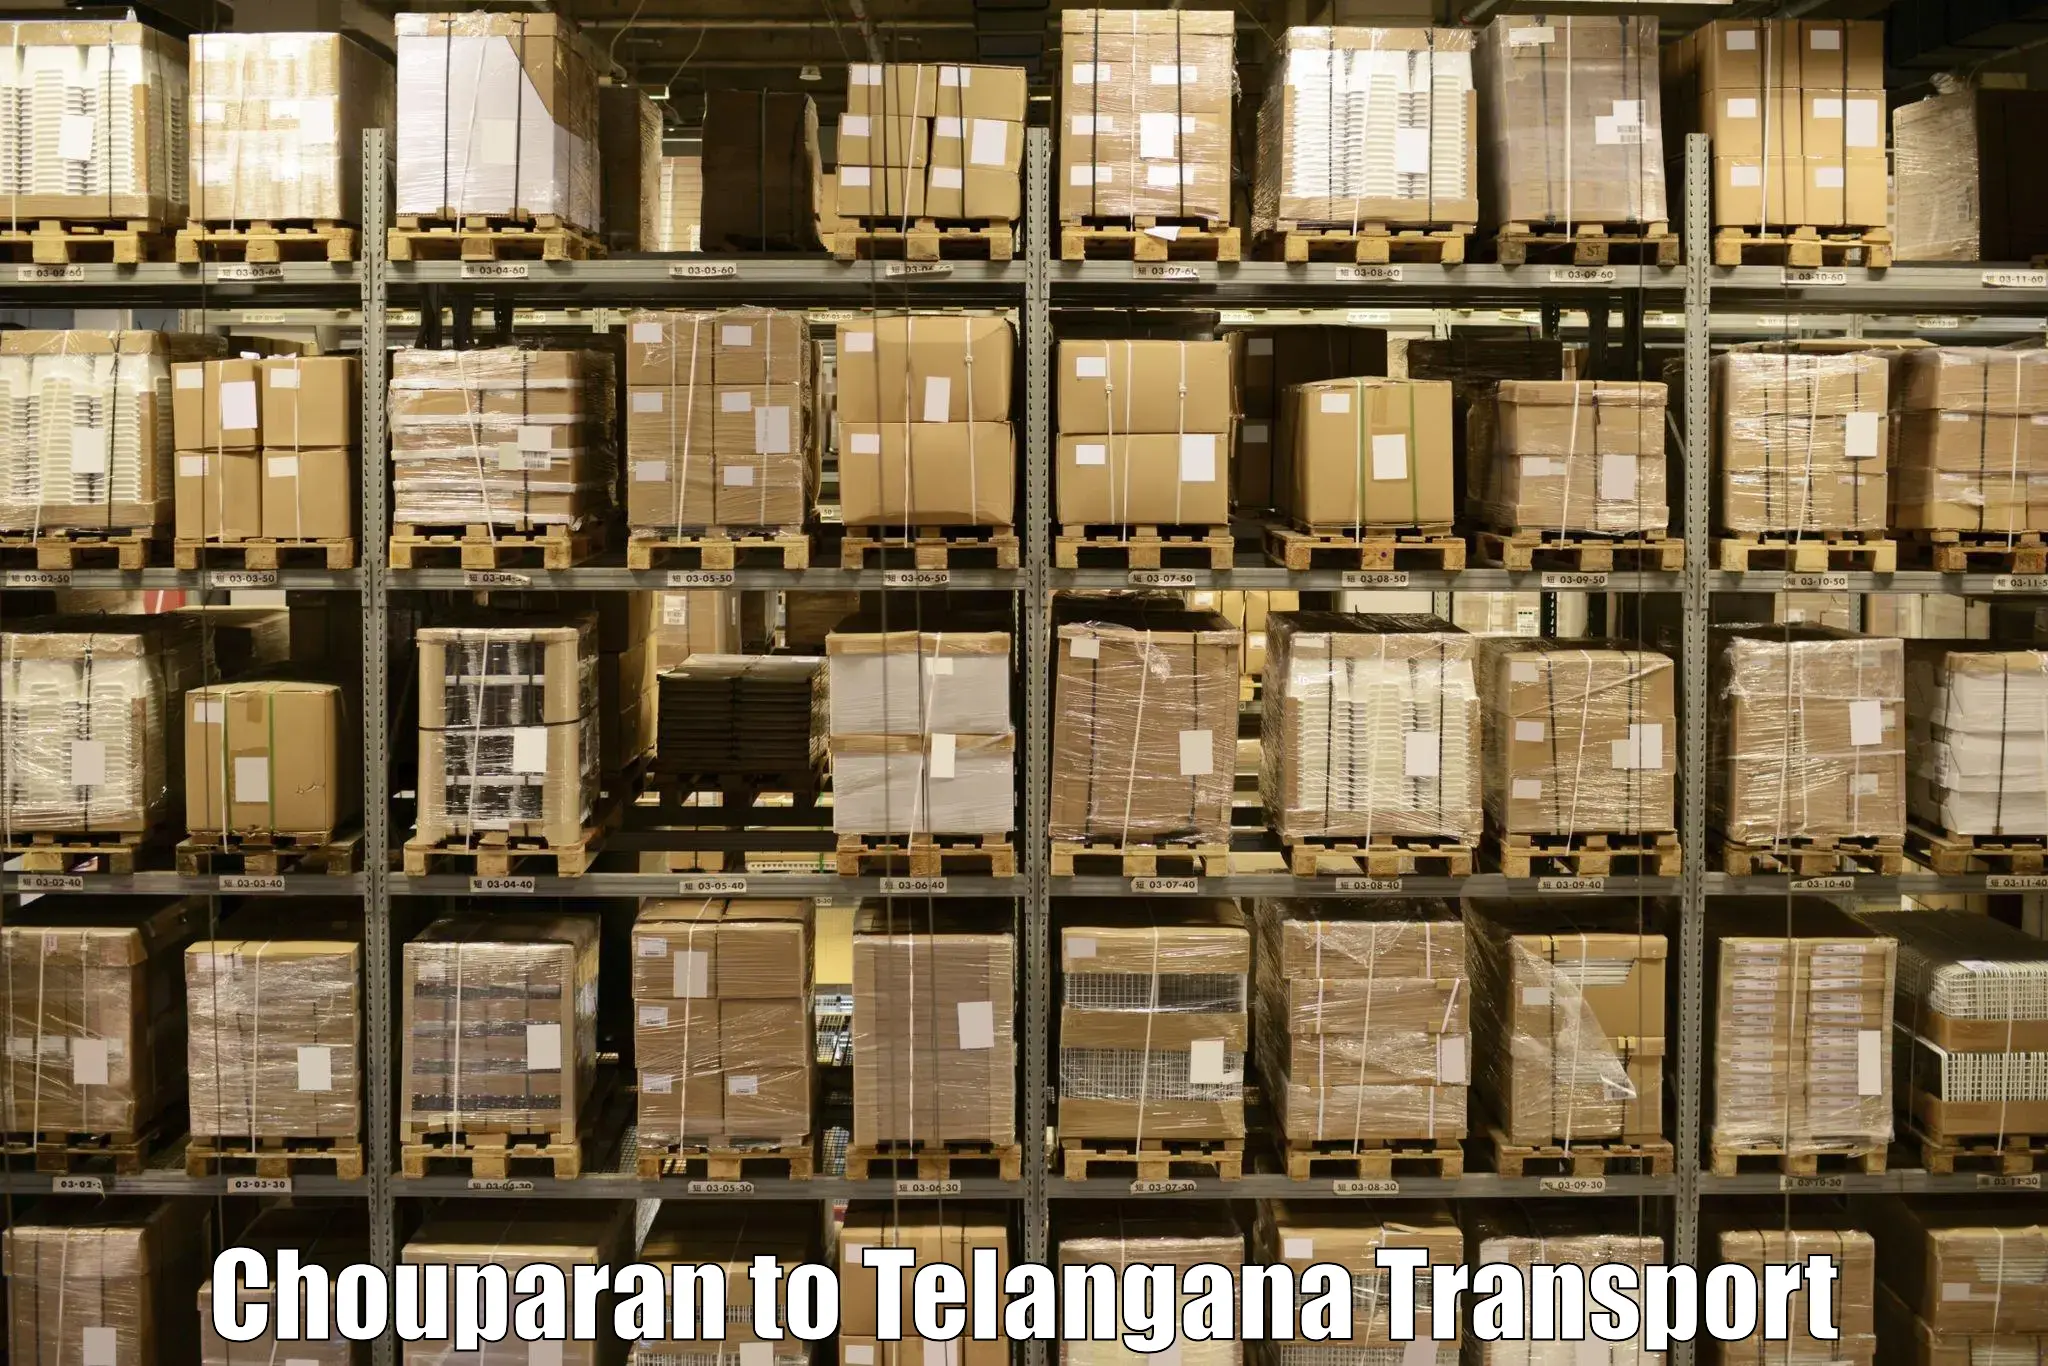 Domestic goods transportation services Chouparan to Manthani